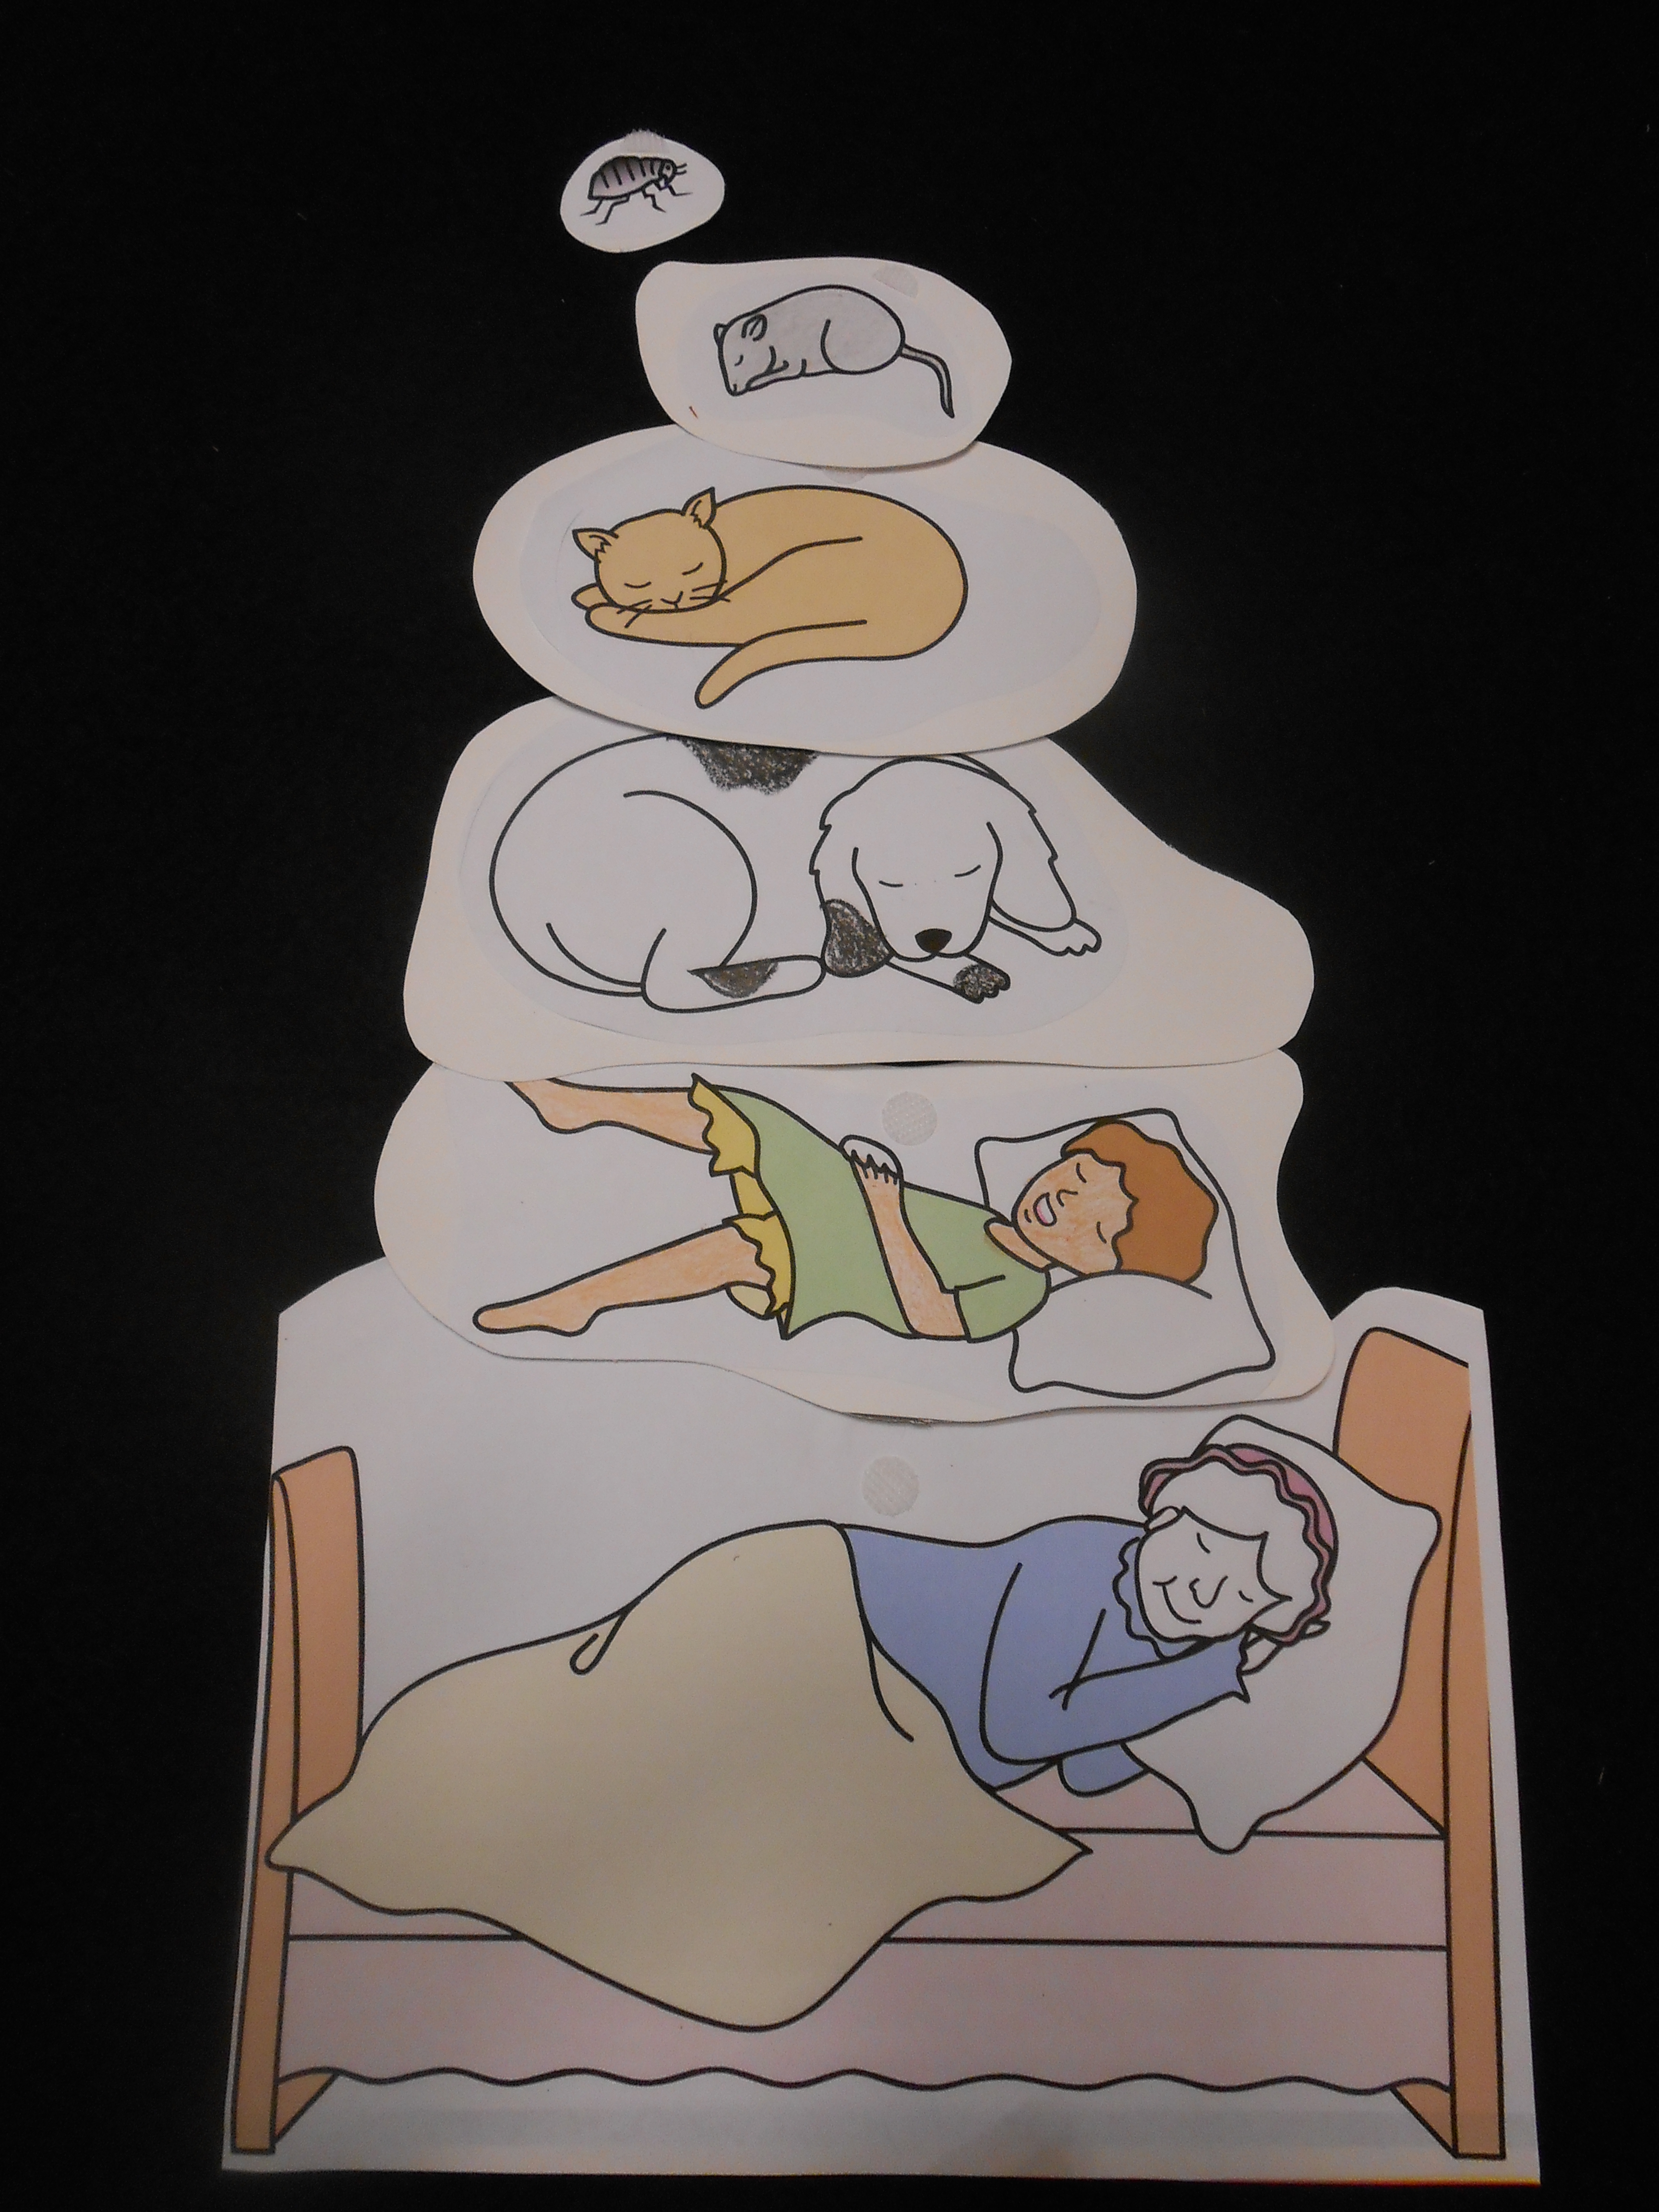 napping house clipart - photo #23